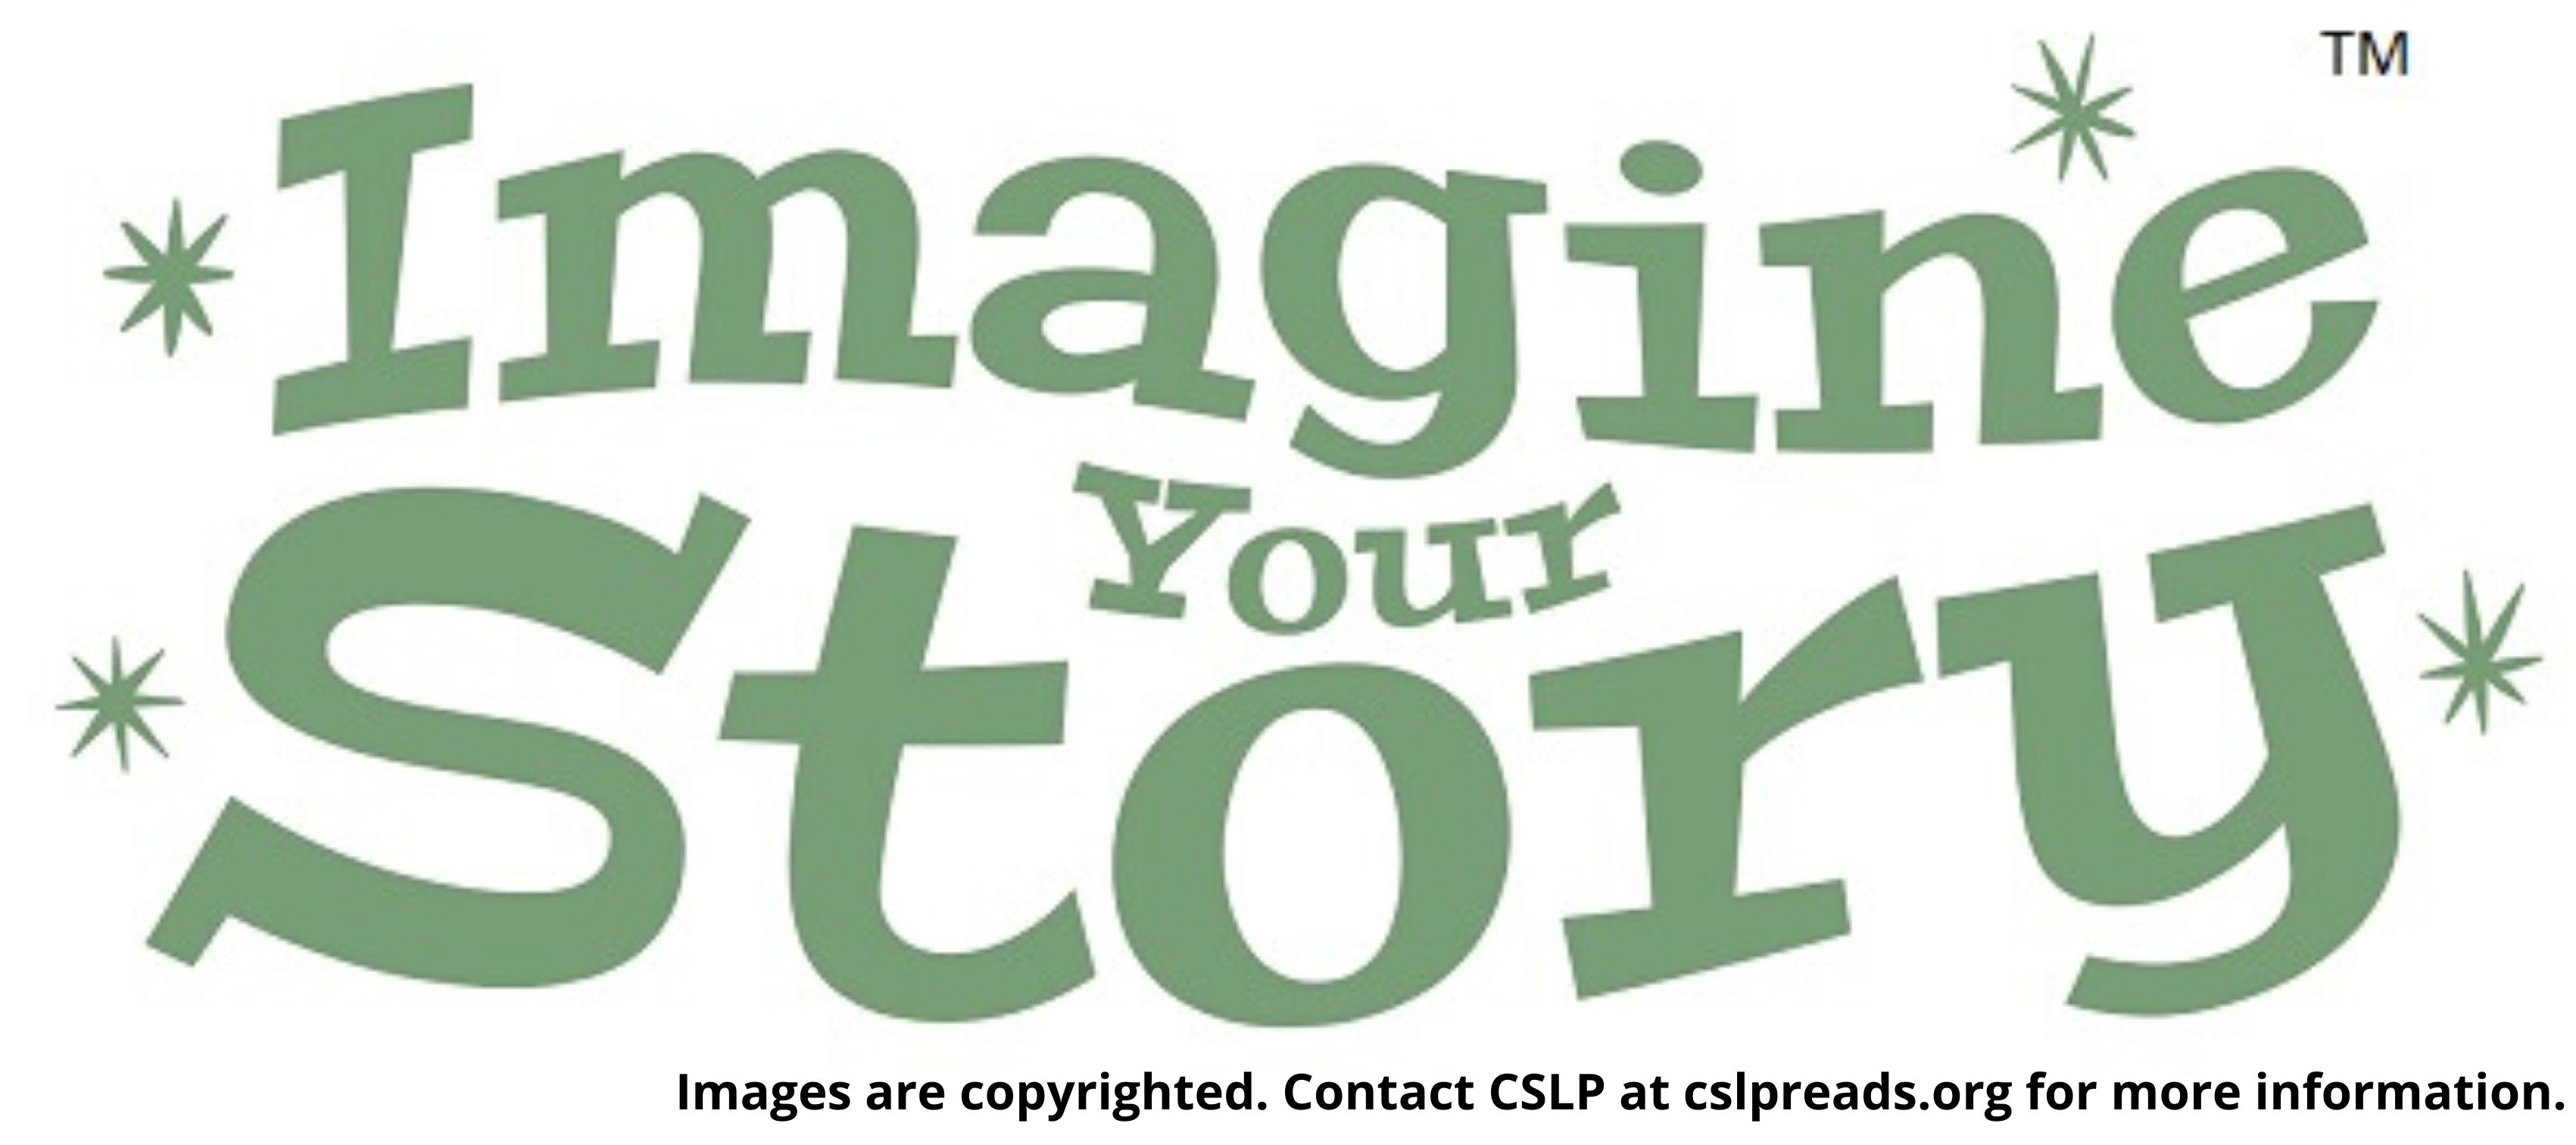 Images are copyrighted. Contact CSLP at cslpreads.org for more information..jpg